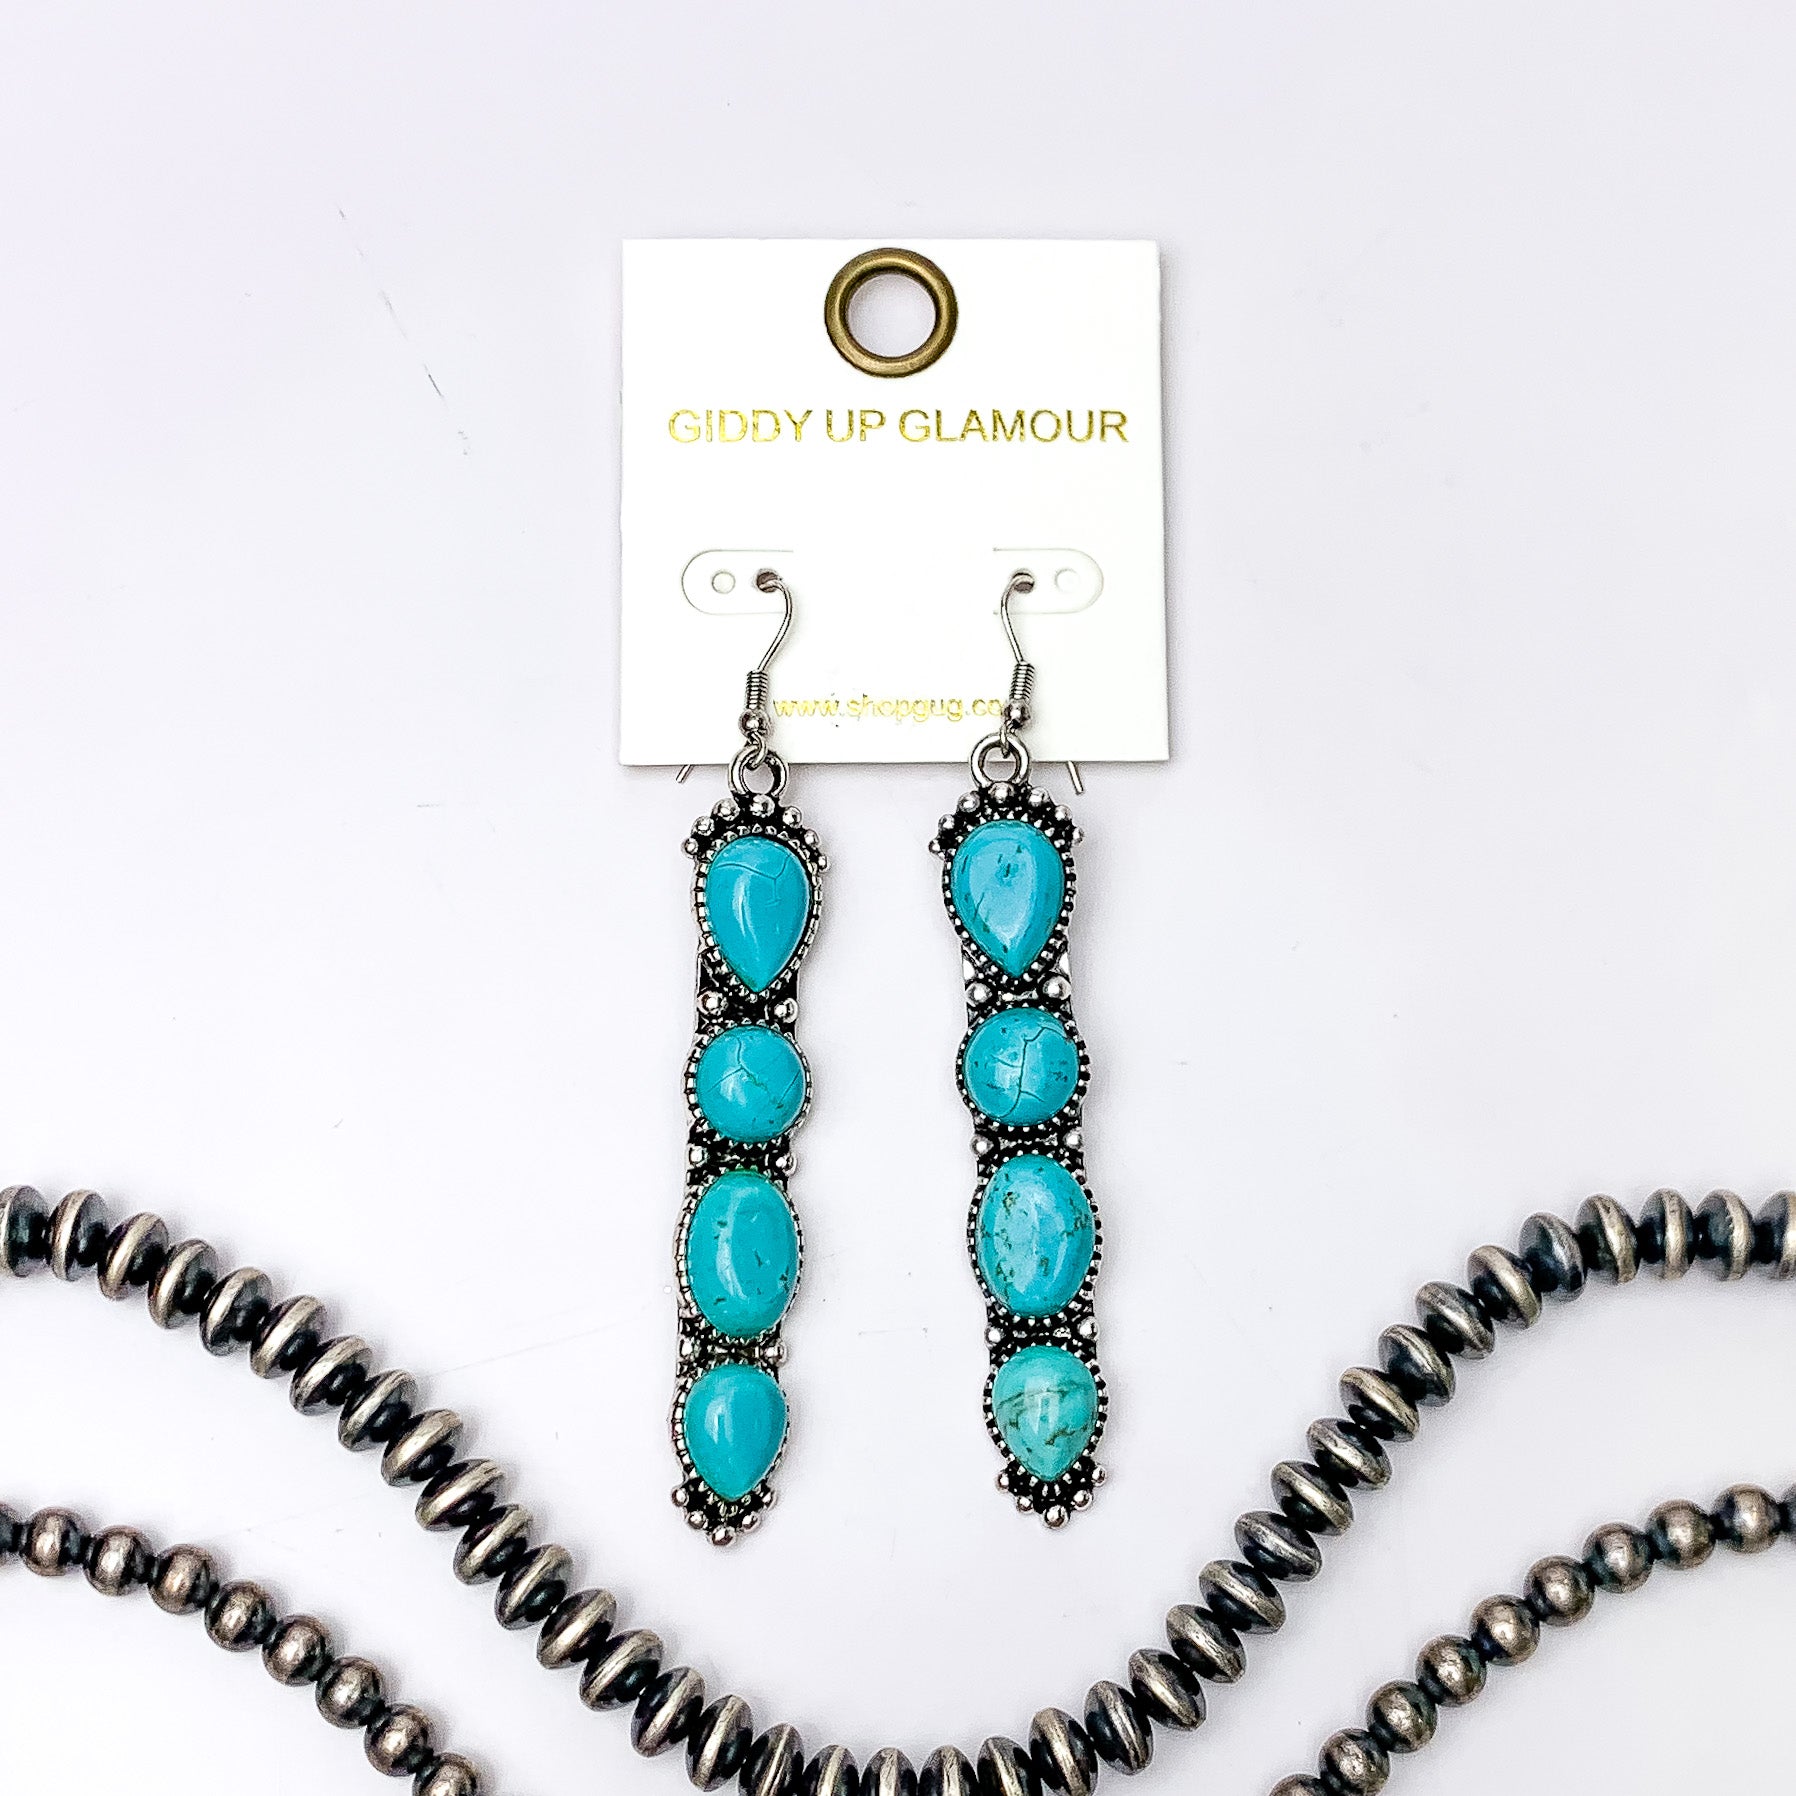 Silver fish hook earrings with a four, turquoise stone pendant. These earrings are pictured on a white background with silver beads at the bottom of the picture. 